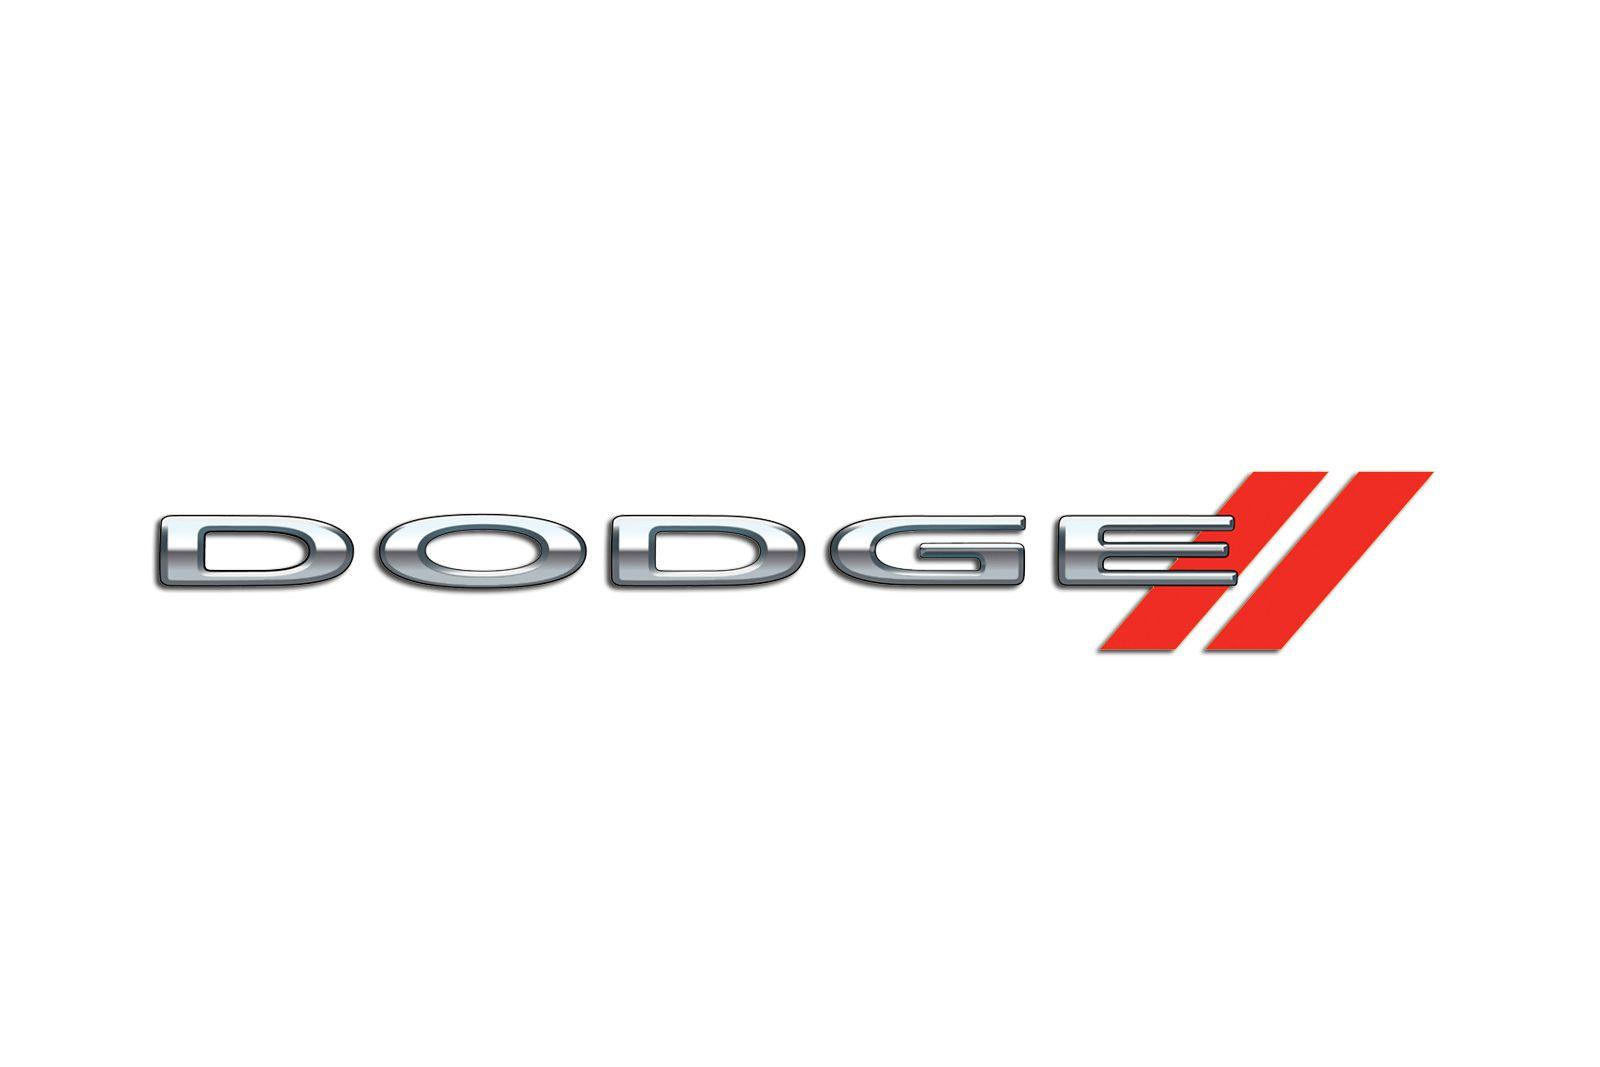 Two and Two Red Blue Lines Logo - Dodge Logo, Dodge Car Symbol Meaning and History | Car Brand Names.com